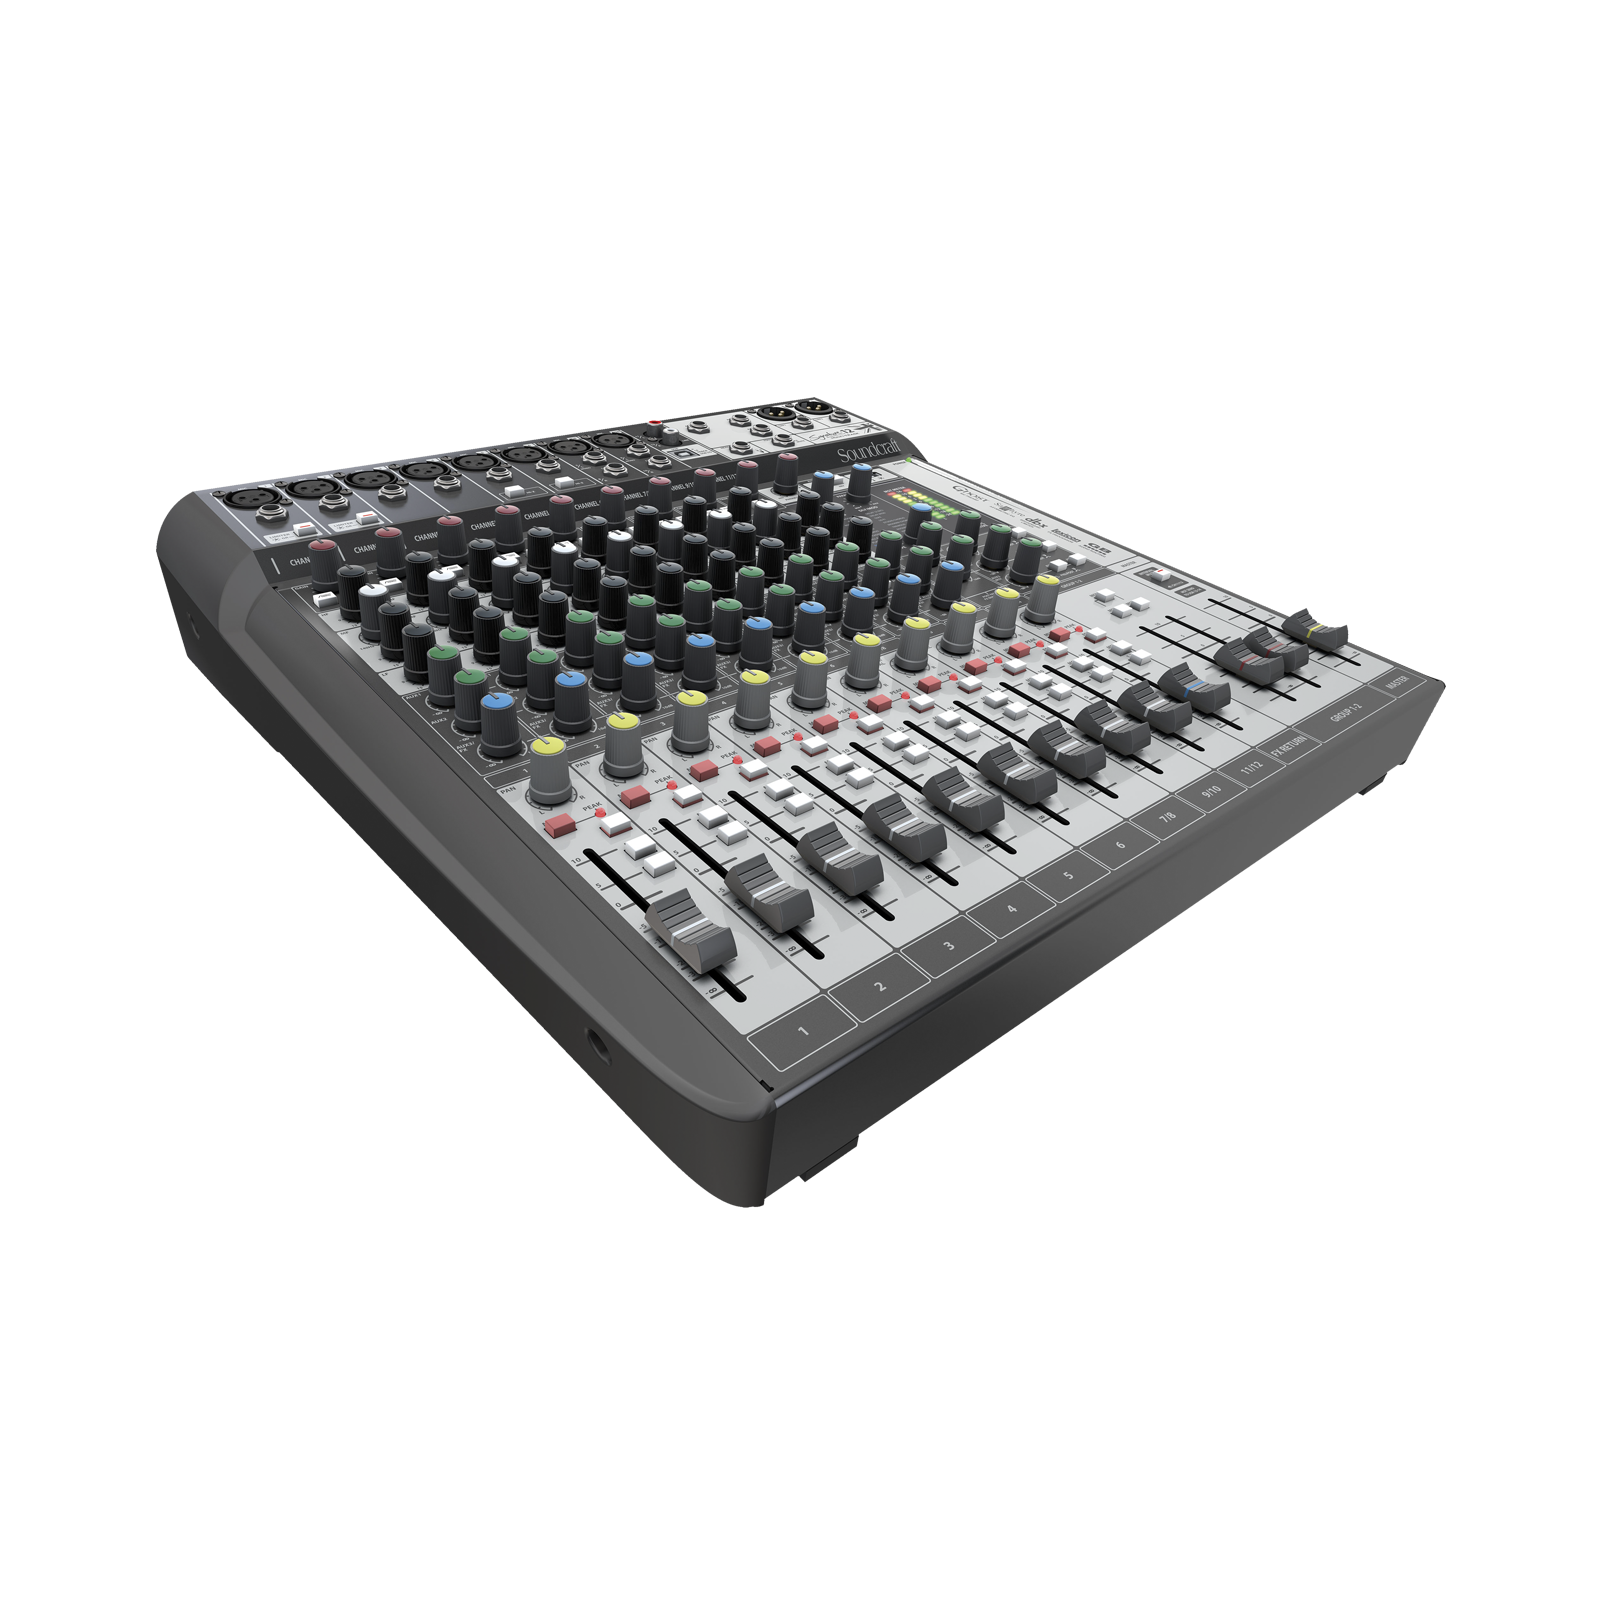 Signature 12 MTK - Black - 12-input analogue mixer with onboard effects and multi-track USB recording and playback - Detailshot 2